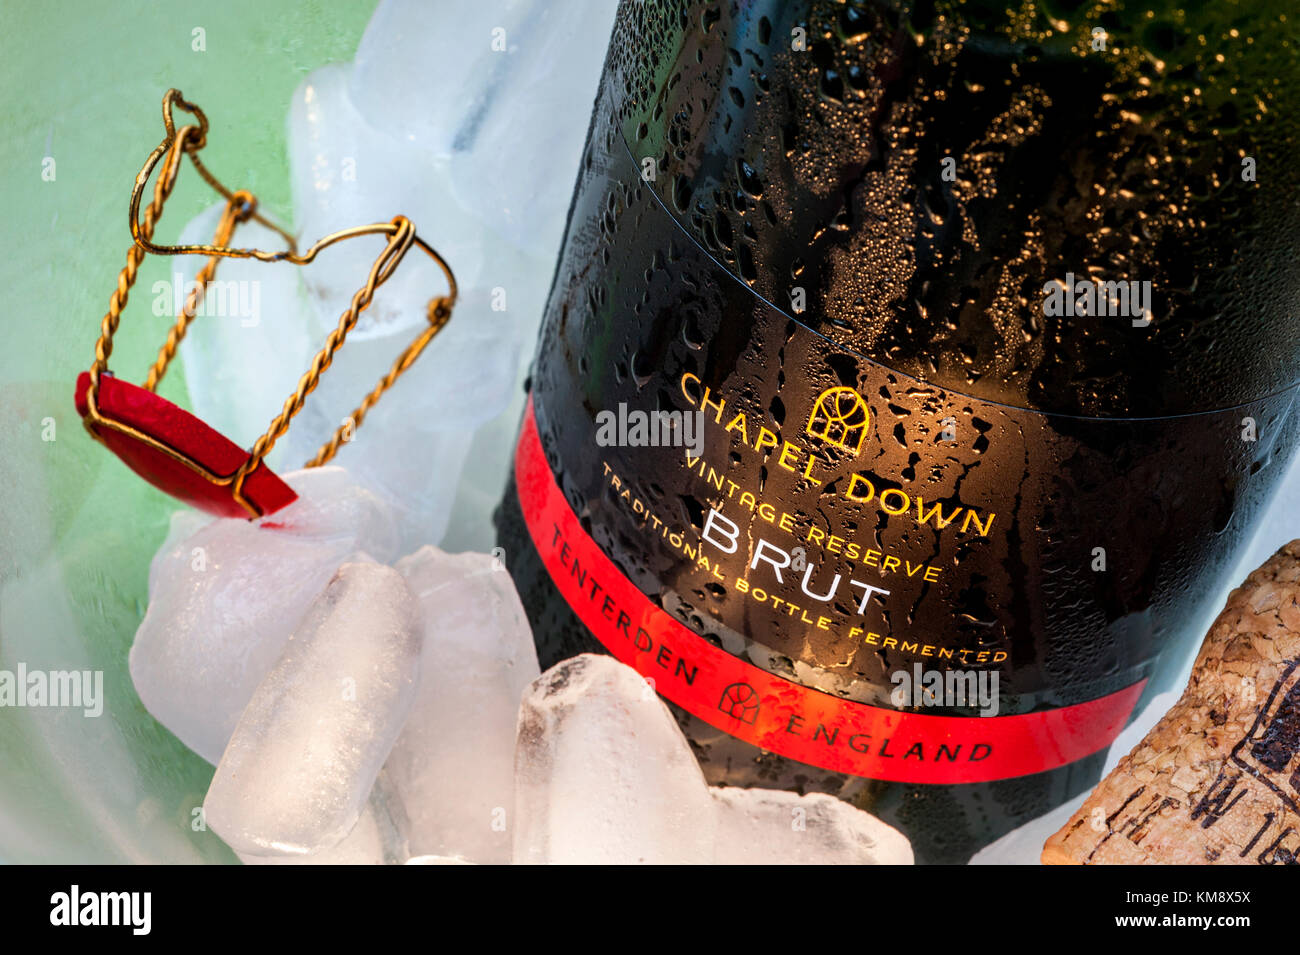 English vintage reserve sparkling wine label 'Chapel Down Brut' bottle on ice in wine cooler, with cork and retaining cap in atmospheric dining situation Stock Photo